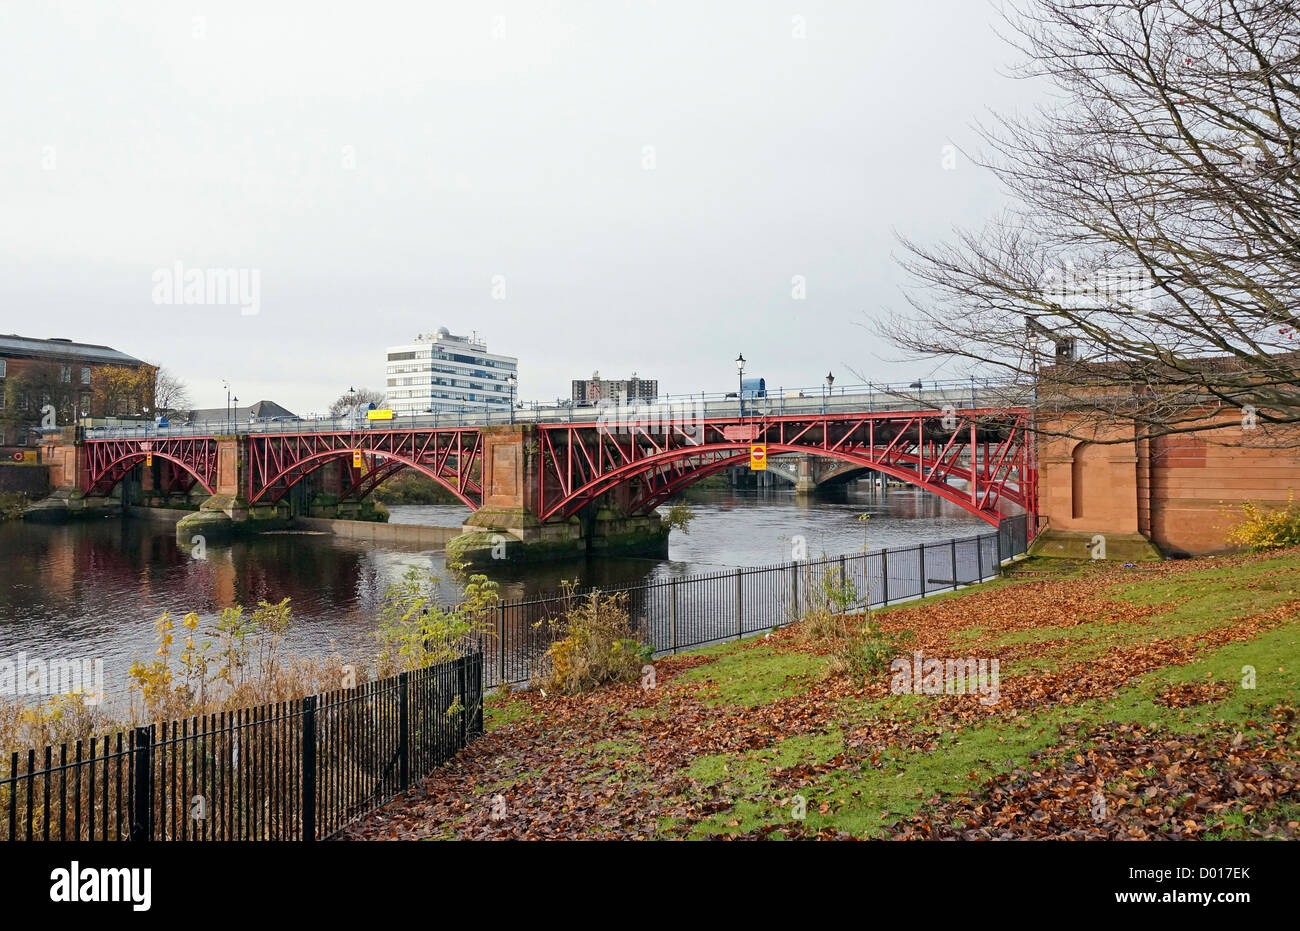 The Tidal Weir and Pipe Bridge spanning the River Clyde at Glasgow Green in central Glasgow Scotland Stock Photo